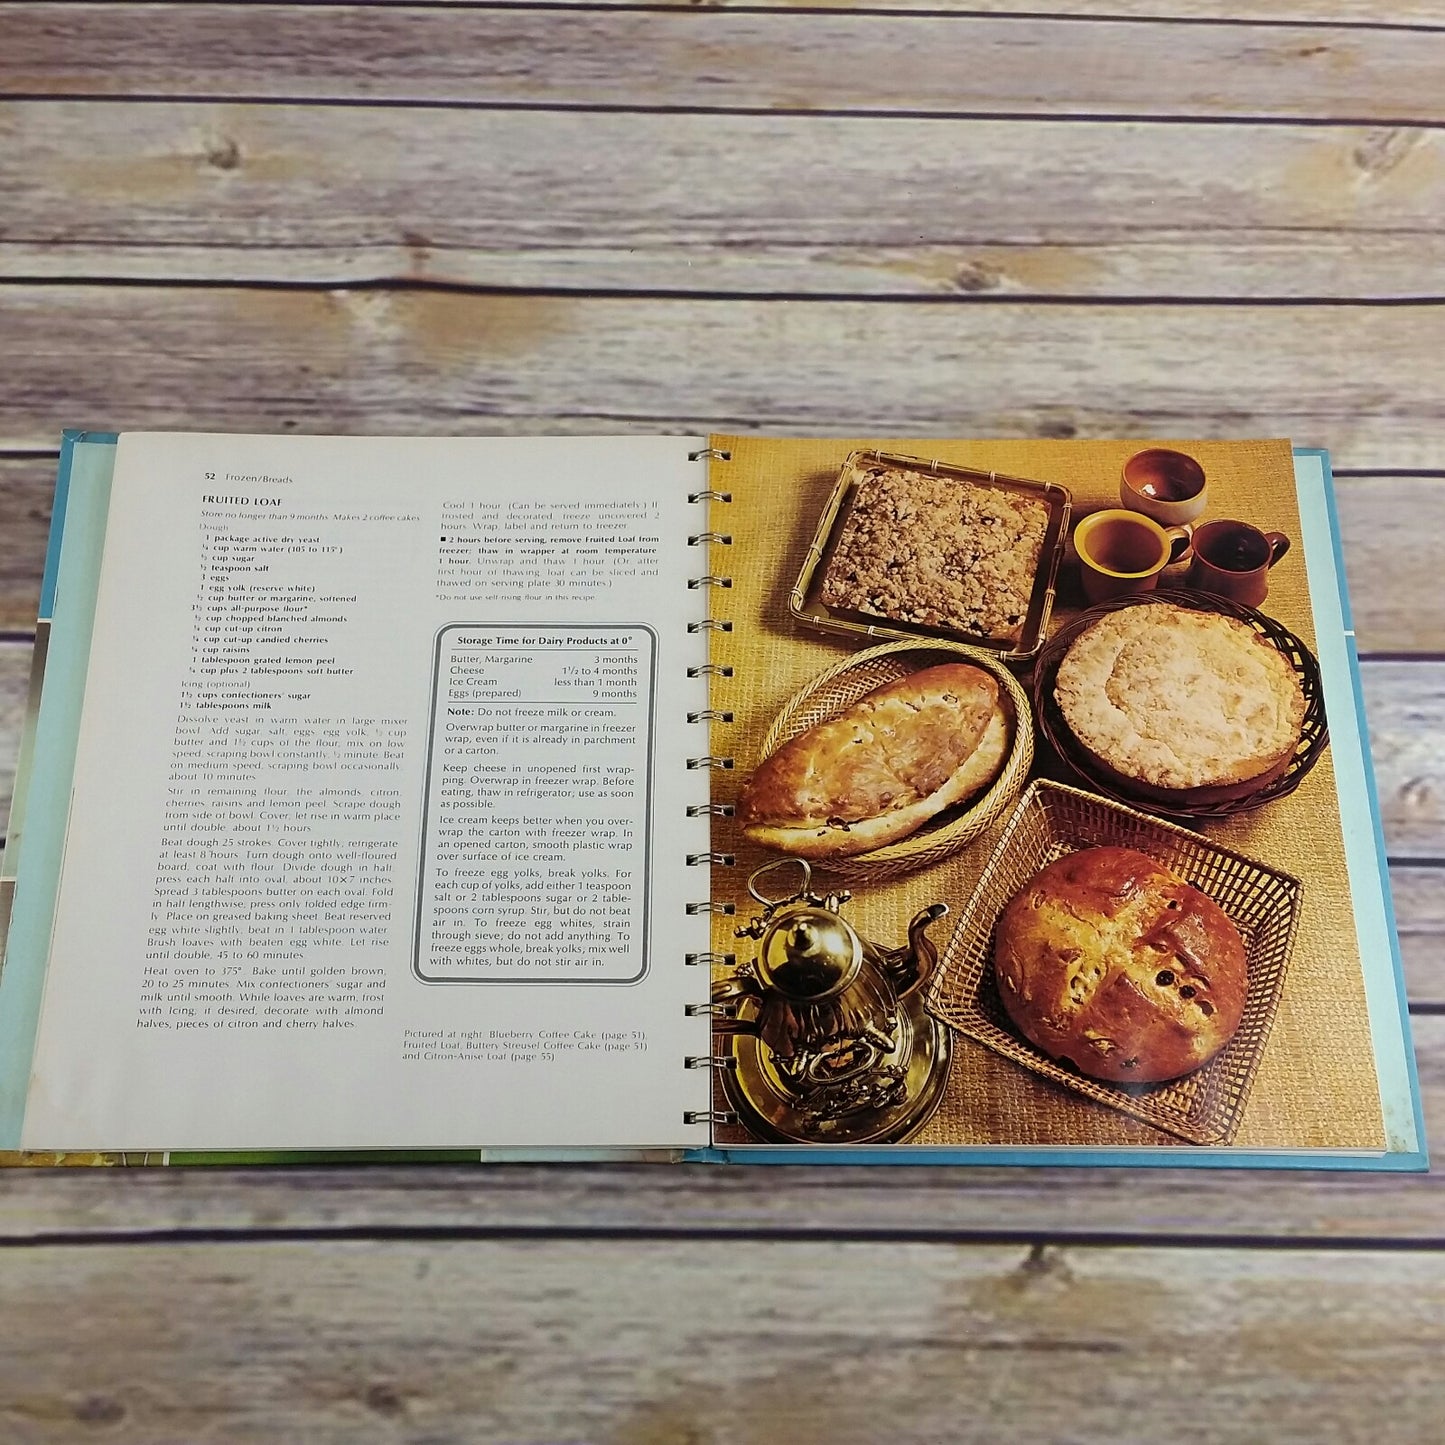 Vintage Cookbook Betty Crocker Do Ahead Recipes 1975 From Freezer and Refrigerator Hardcover Spiral Bound - At Grandma's Table